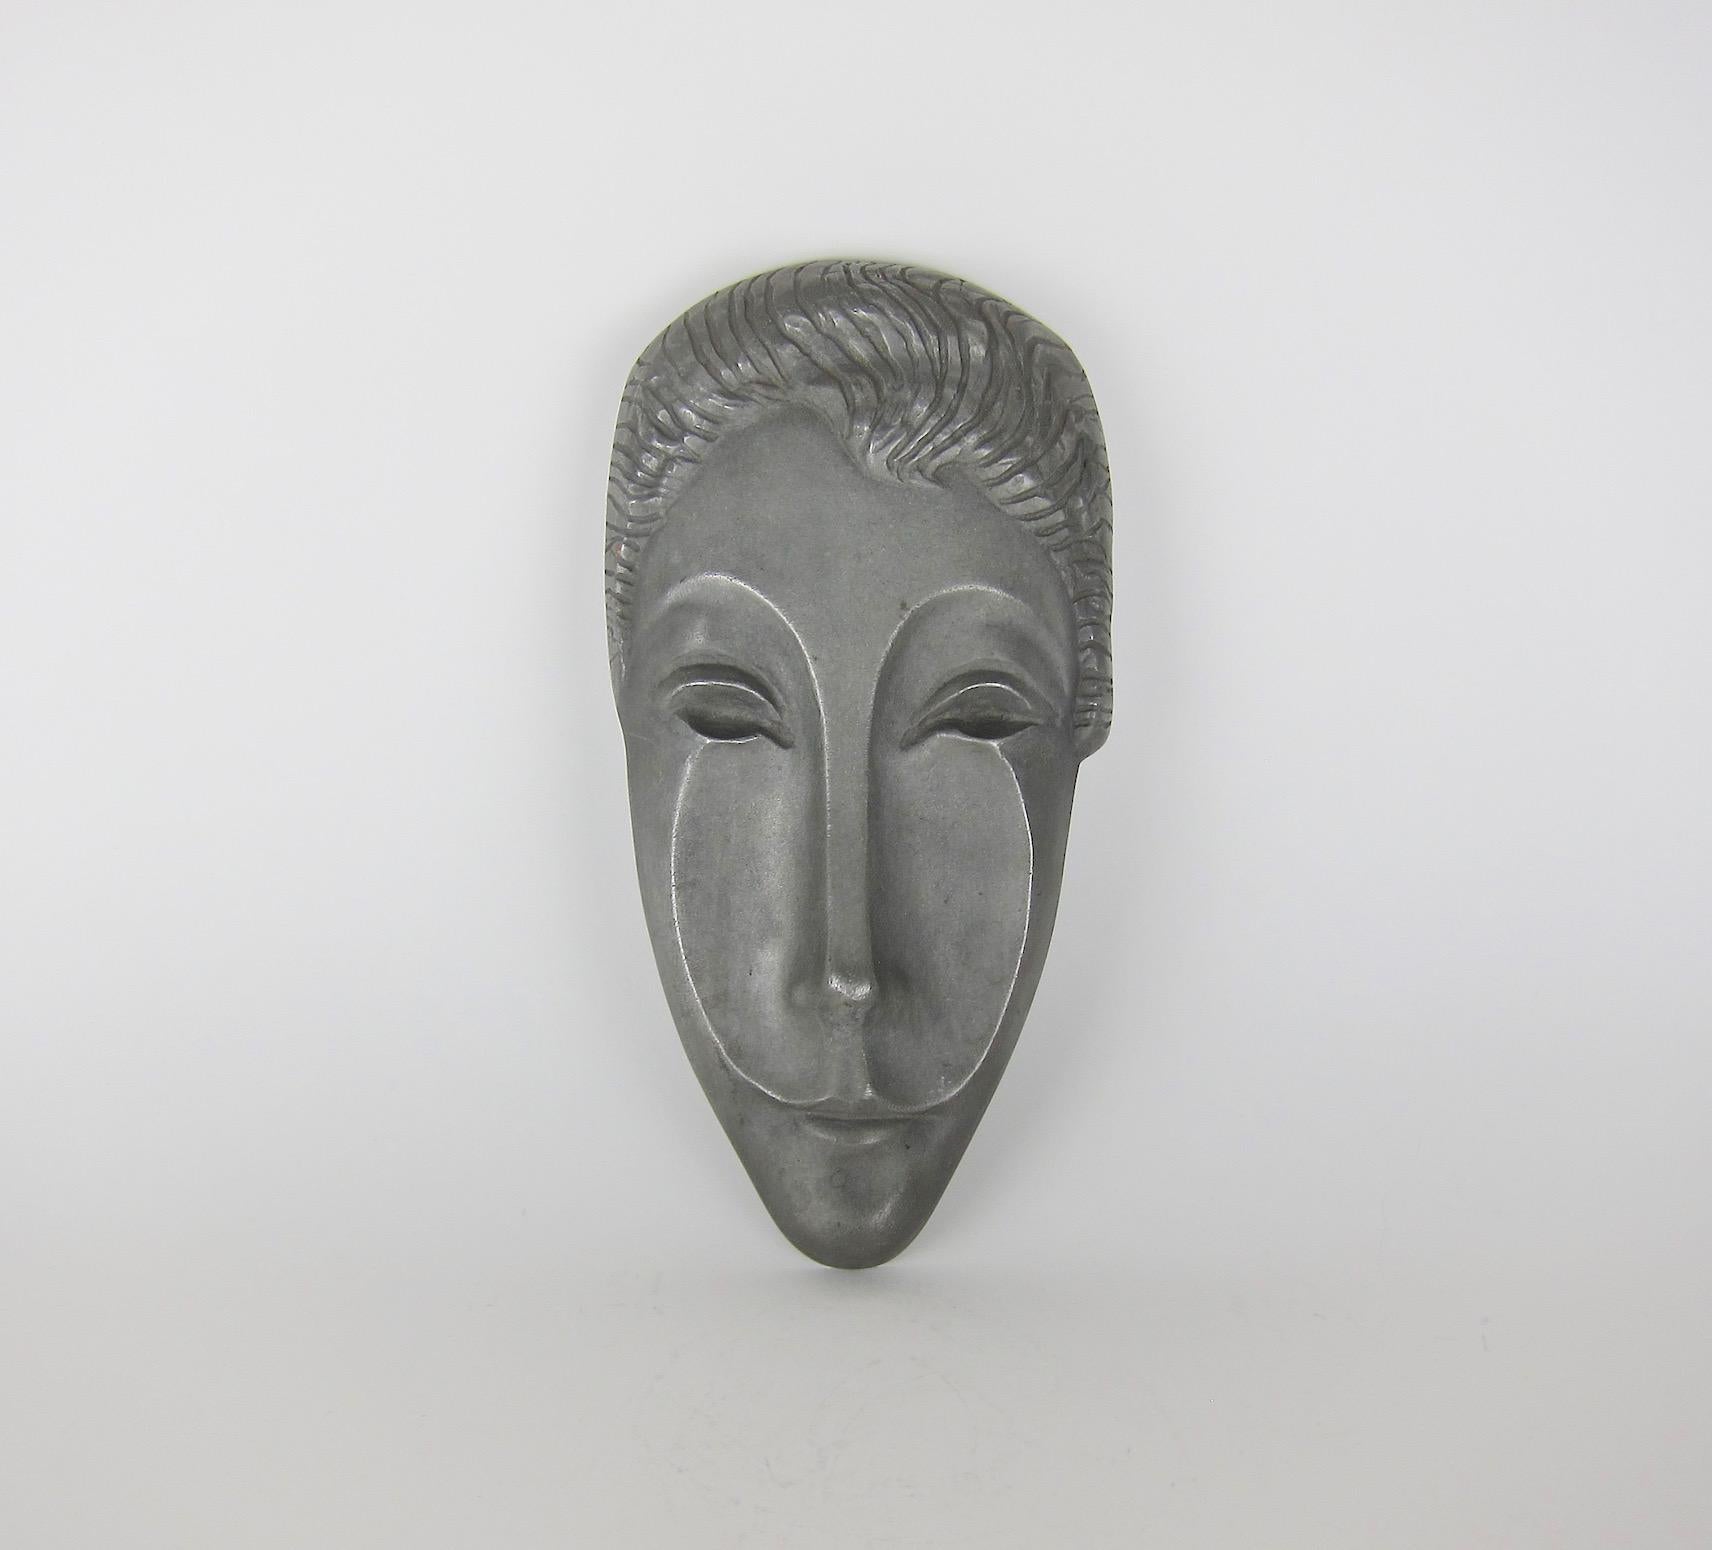 A midcentury wall sculpture of Letitia, the Roman Goddess of joy, gaiety, and happiness, by American sculptor Evaline Clark Sellors (1903-1995). The elongated and abstracted face of cast aluminum dates circa 1960 and is in very good condition with